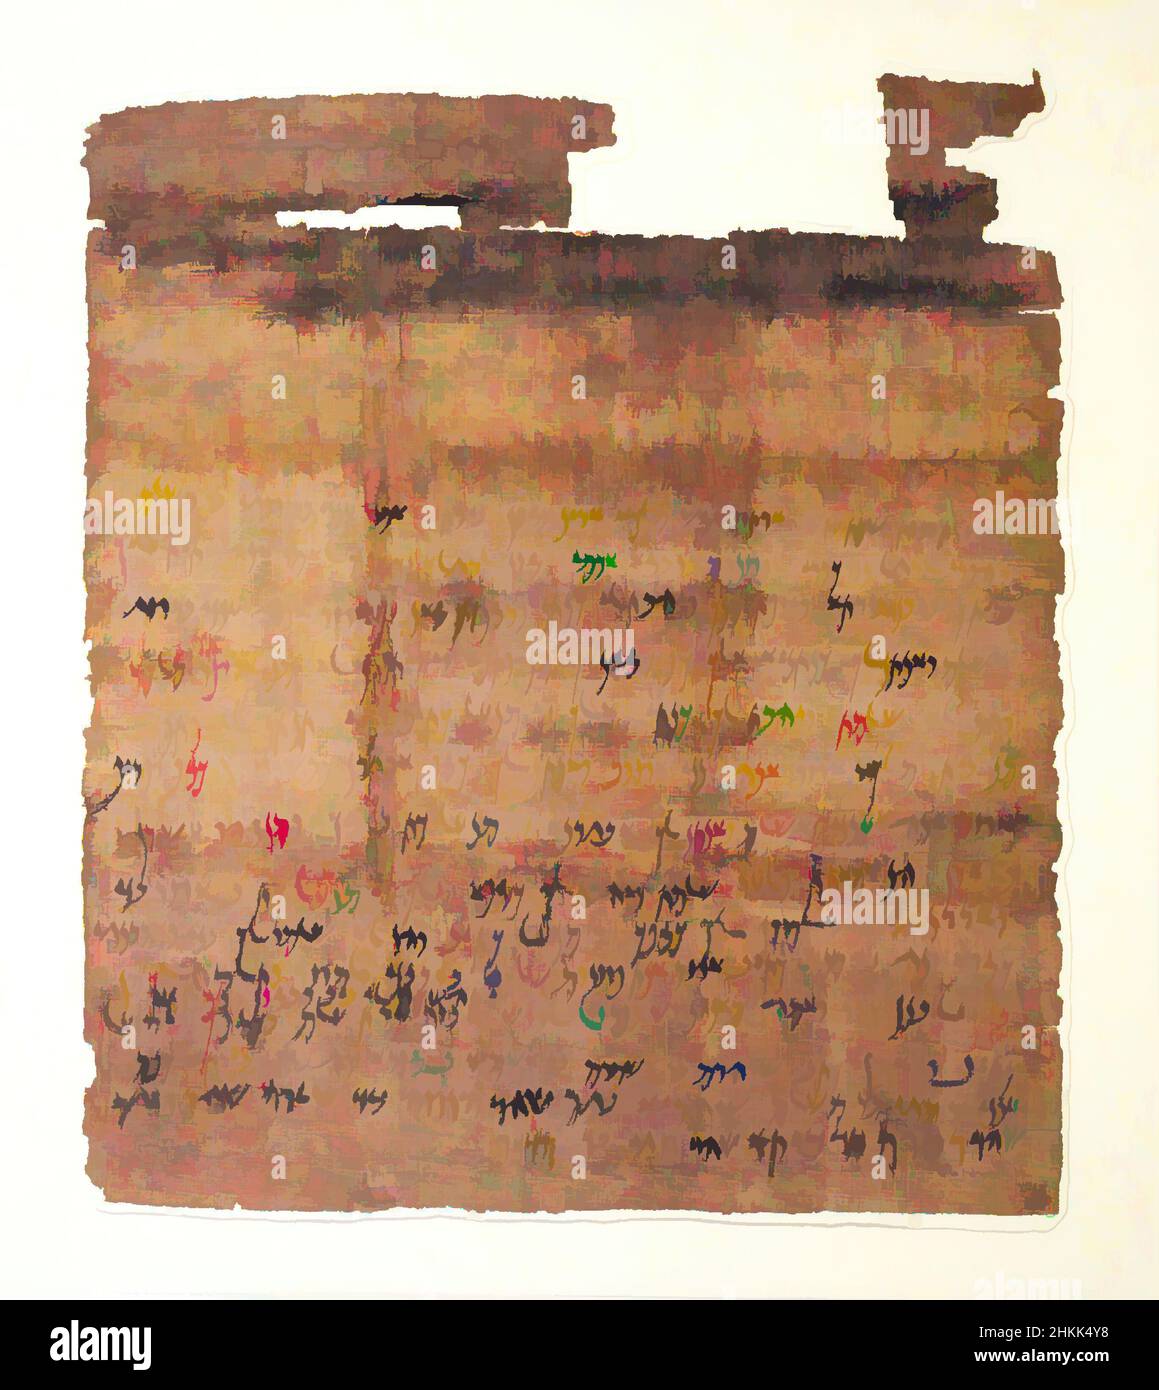 Art inspired by Receipt for a Grain Loan, Aramaic, Papyrus, ink, mud, December, 402 B.C.E., Dynasty 28, Late Period, a: Glass: 14 15/16 x 16 1/4 in., 38 x 41.2 cm, agriculture, ancient, archaeology, commerce, document, Elephantine, Jewish, Jewish history, papyrus, purchase, record, text, Classic works modernized by Artotop with a splash of modernity. Shapes, color and value, eye-catching visual impact on art. Emotions through freedom of artworks in a contemporary way. A timeless message pursuing a wildly creative new direction. Artists turning to the digital medium and creating the Artotop NFT Stock Photo